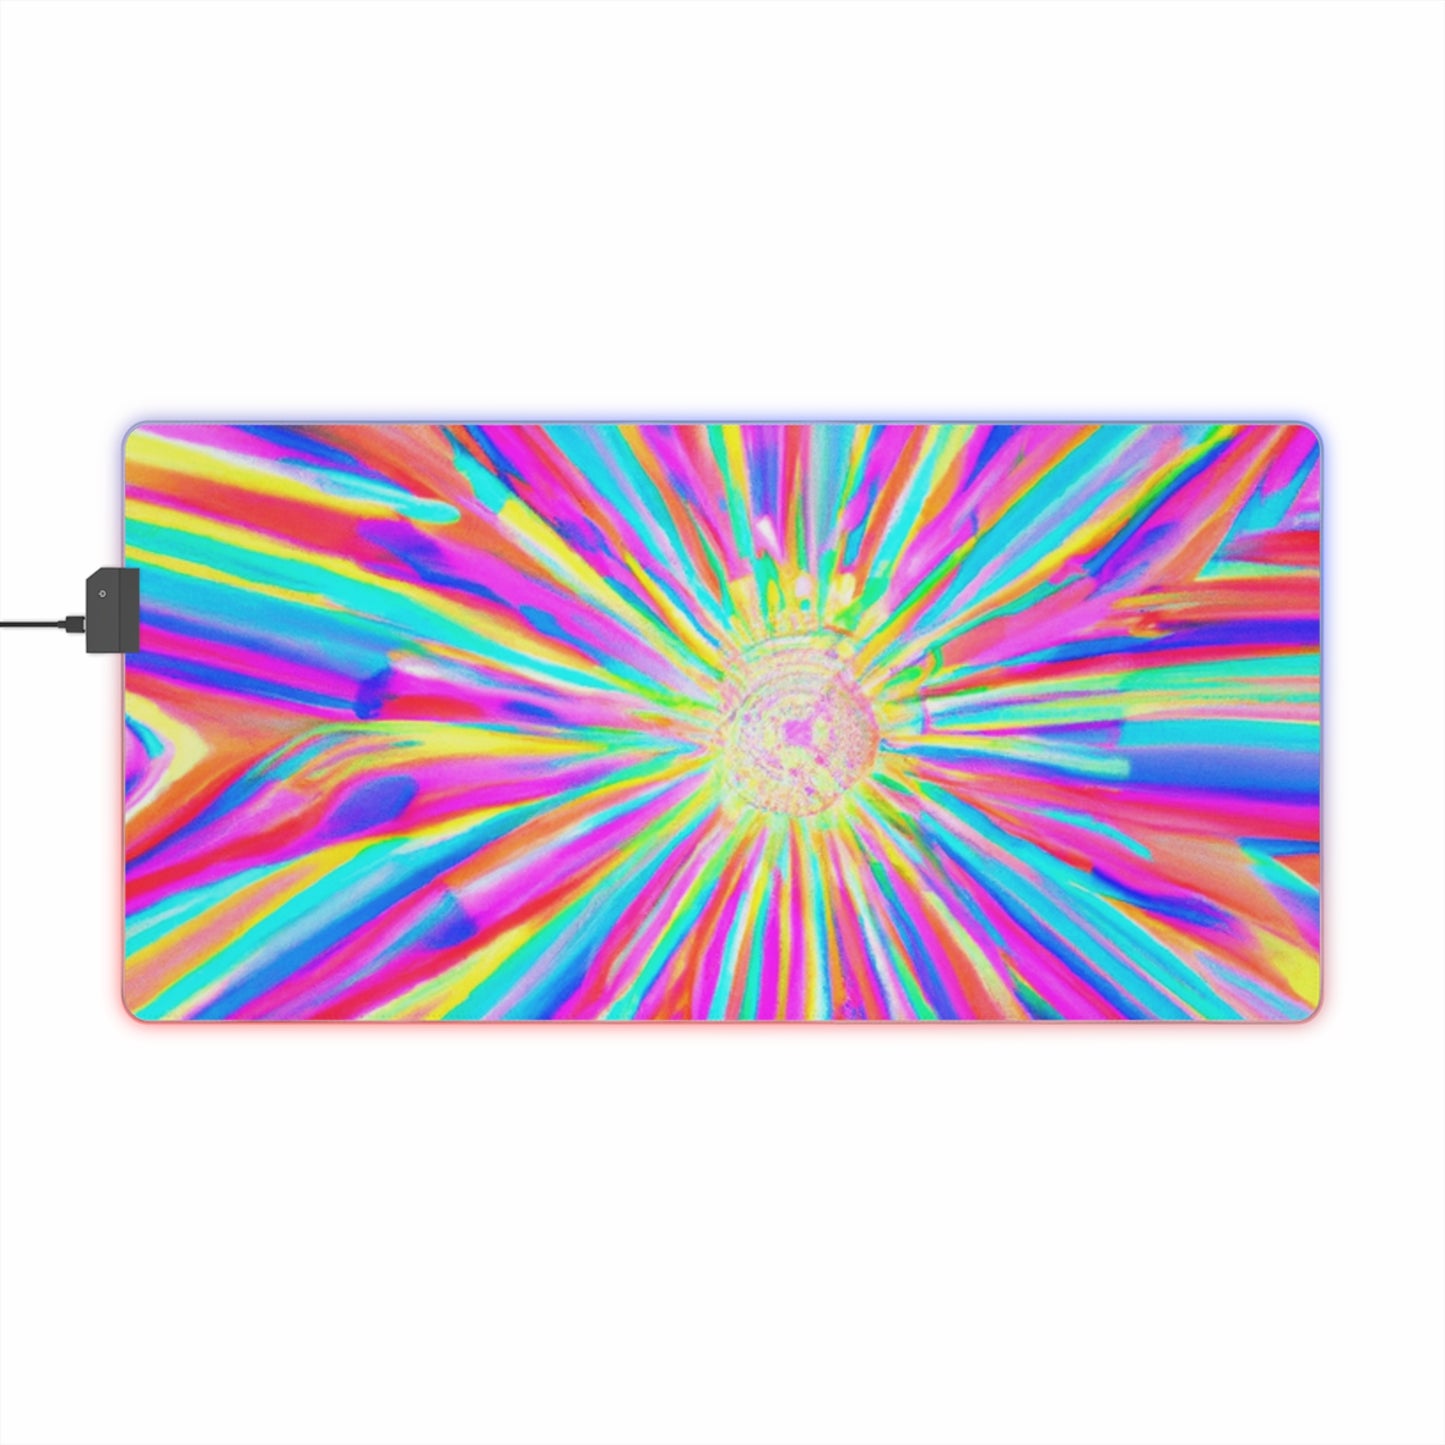 Pinky the Pinball Wizard - Psychedelic Trippy LED Light Up Gaming Mouse Pad